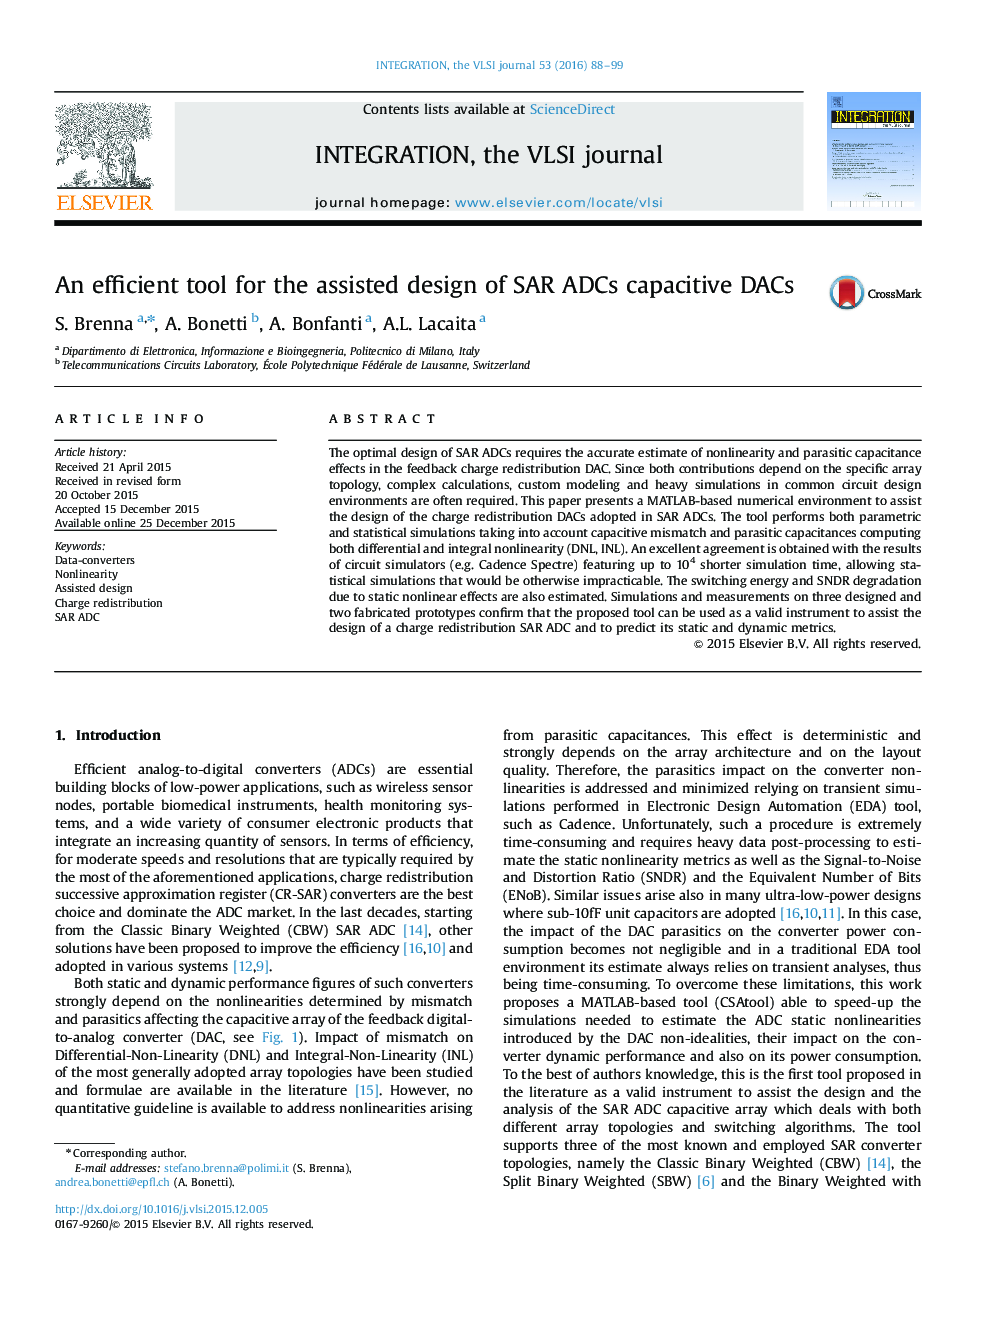 An efficient tool for the assisted design of SAR ADCs capacitive DACs